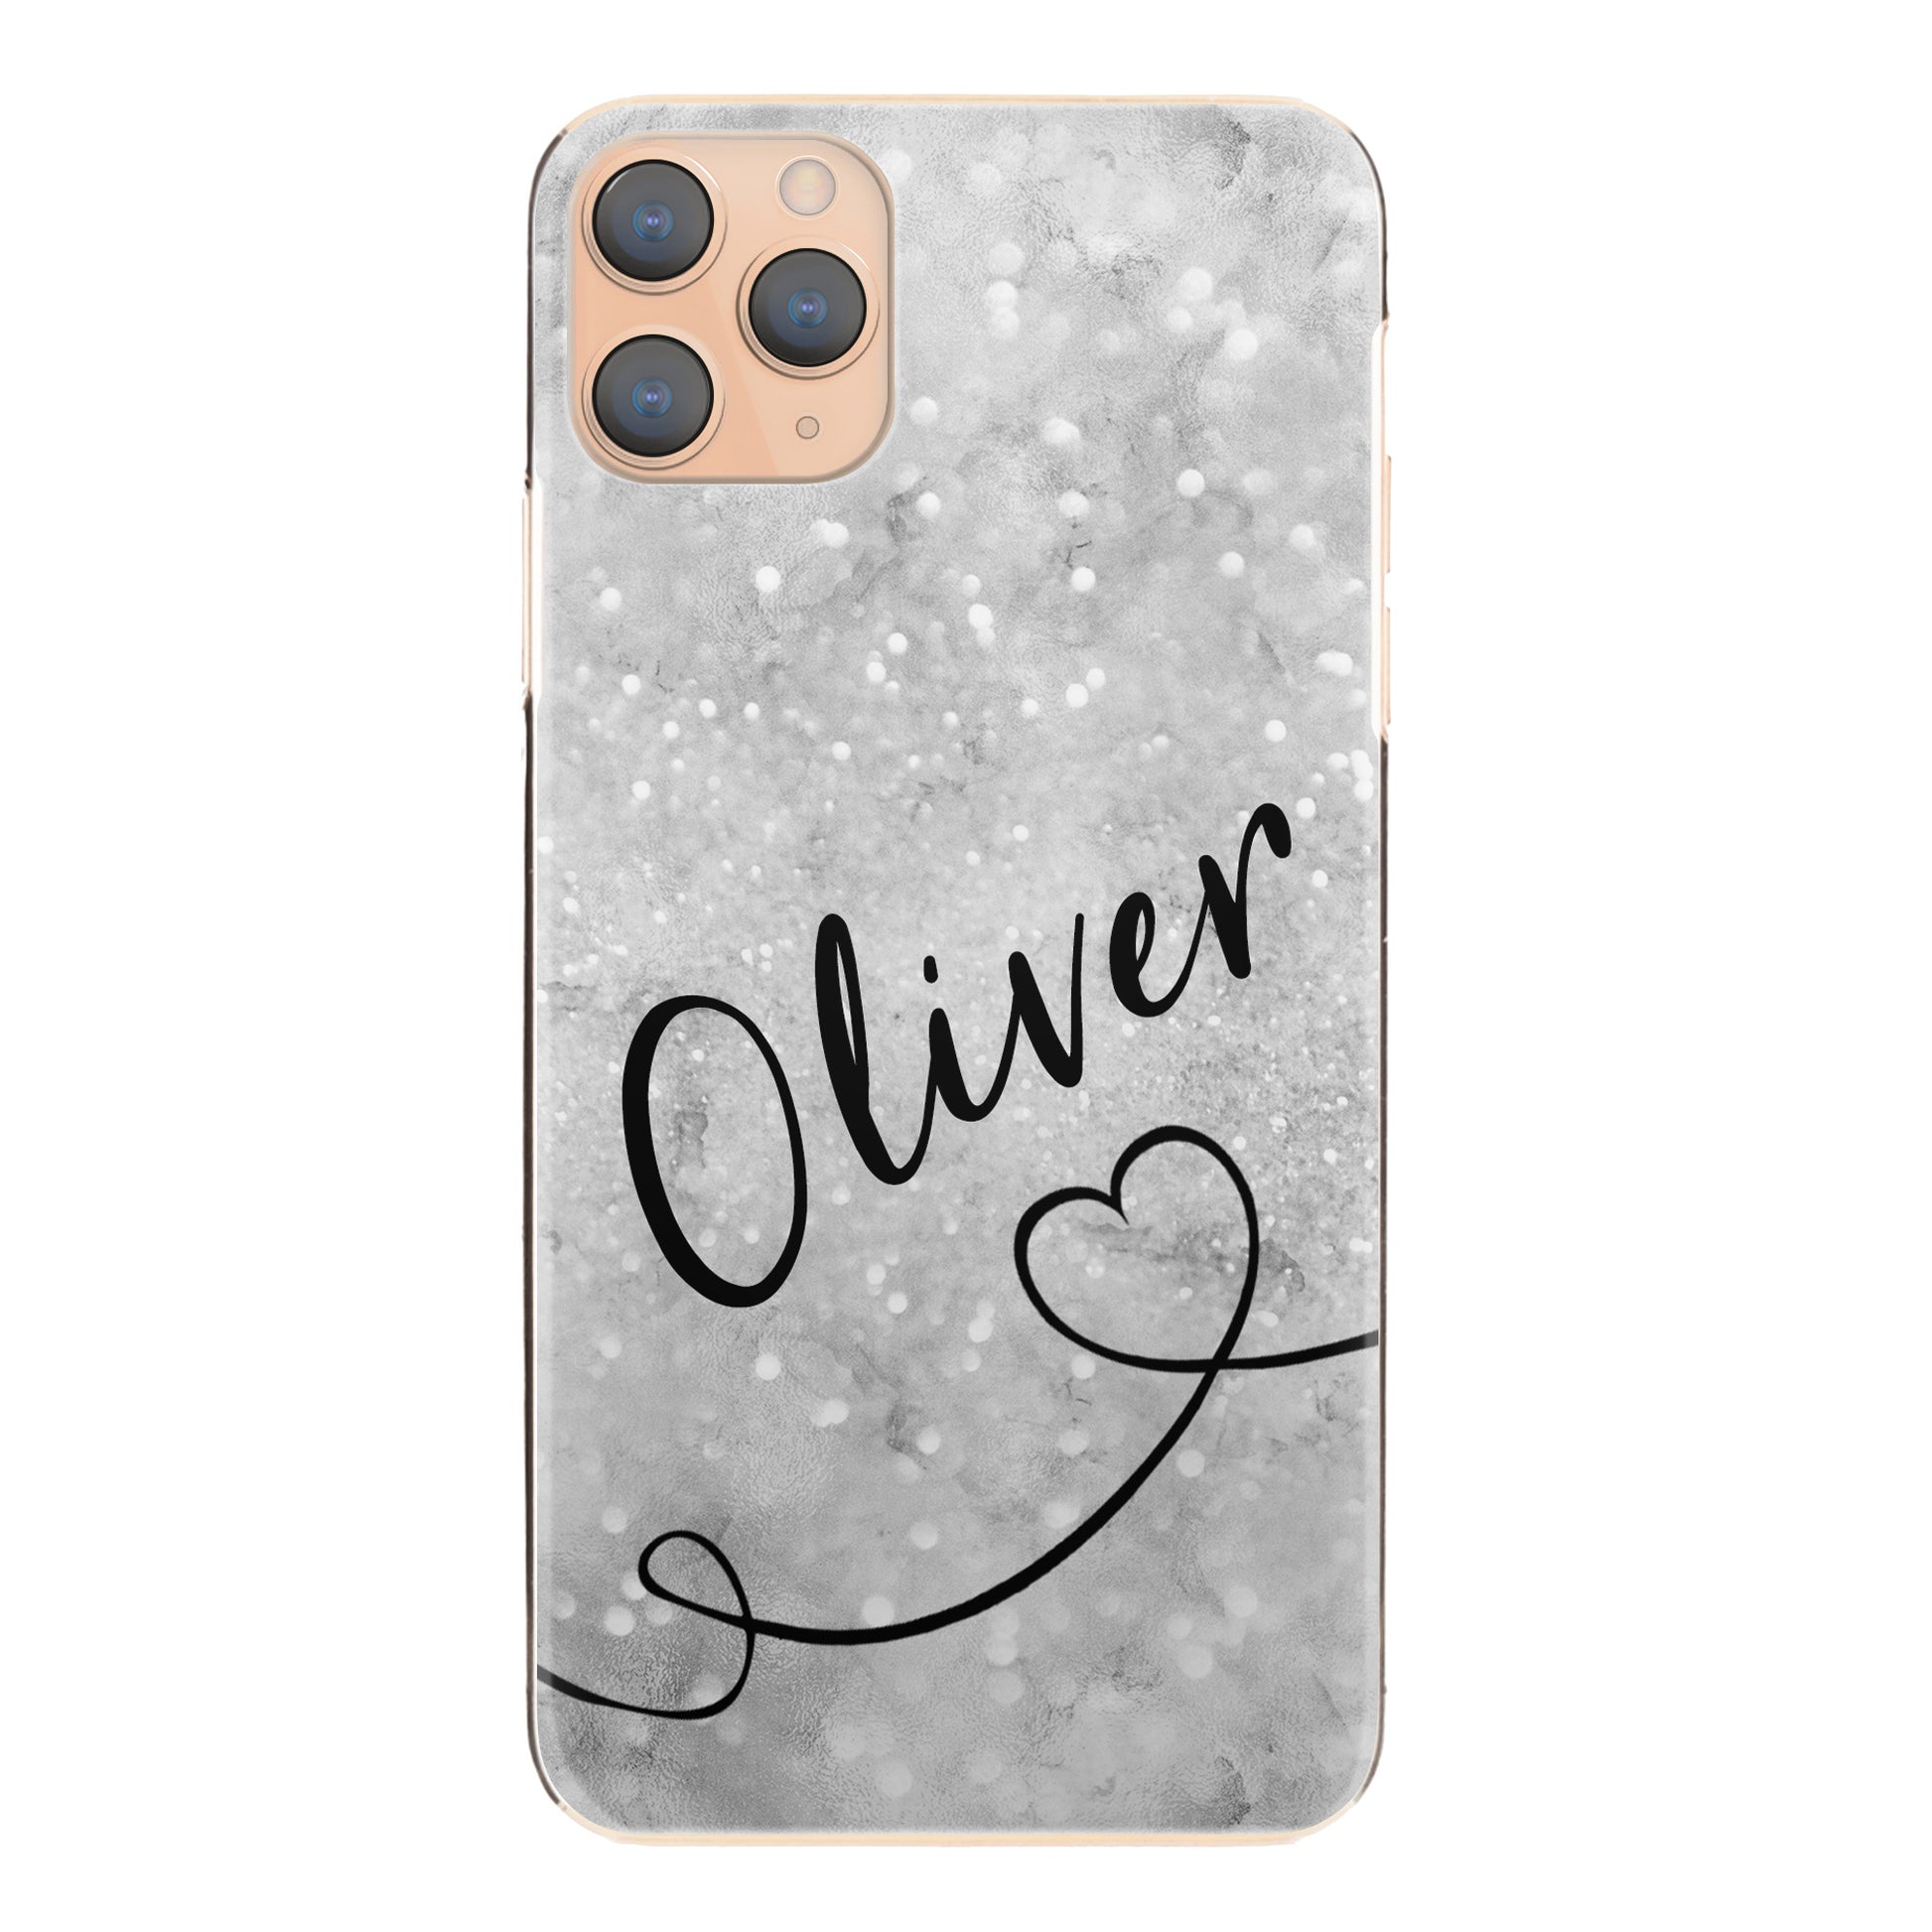 Personalised Samsung Galaxy Phone Hard Case with Stylish Text and Heart Line on Textured Grey